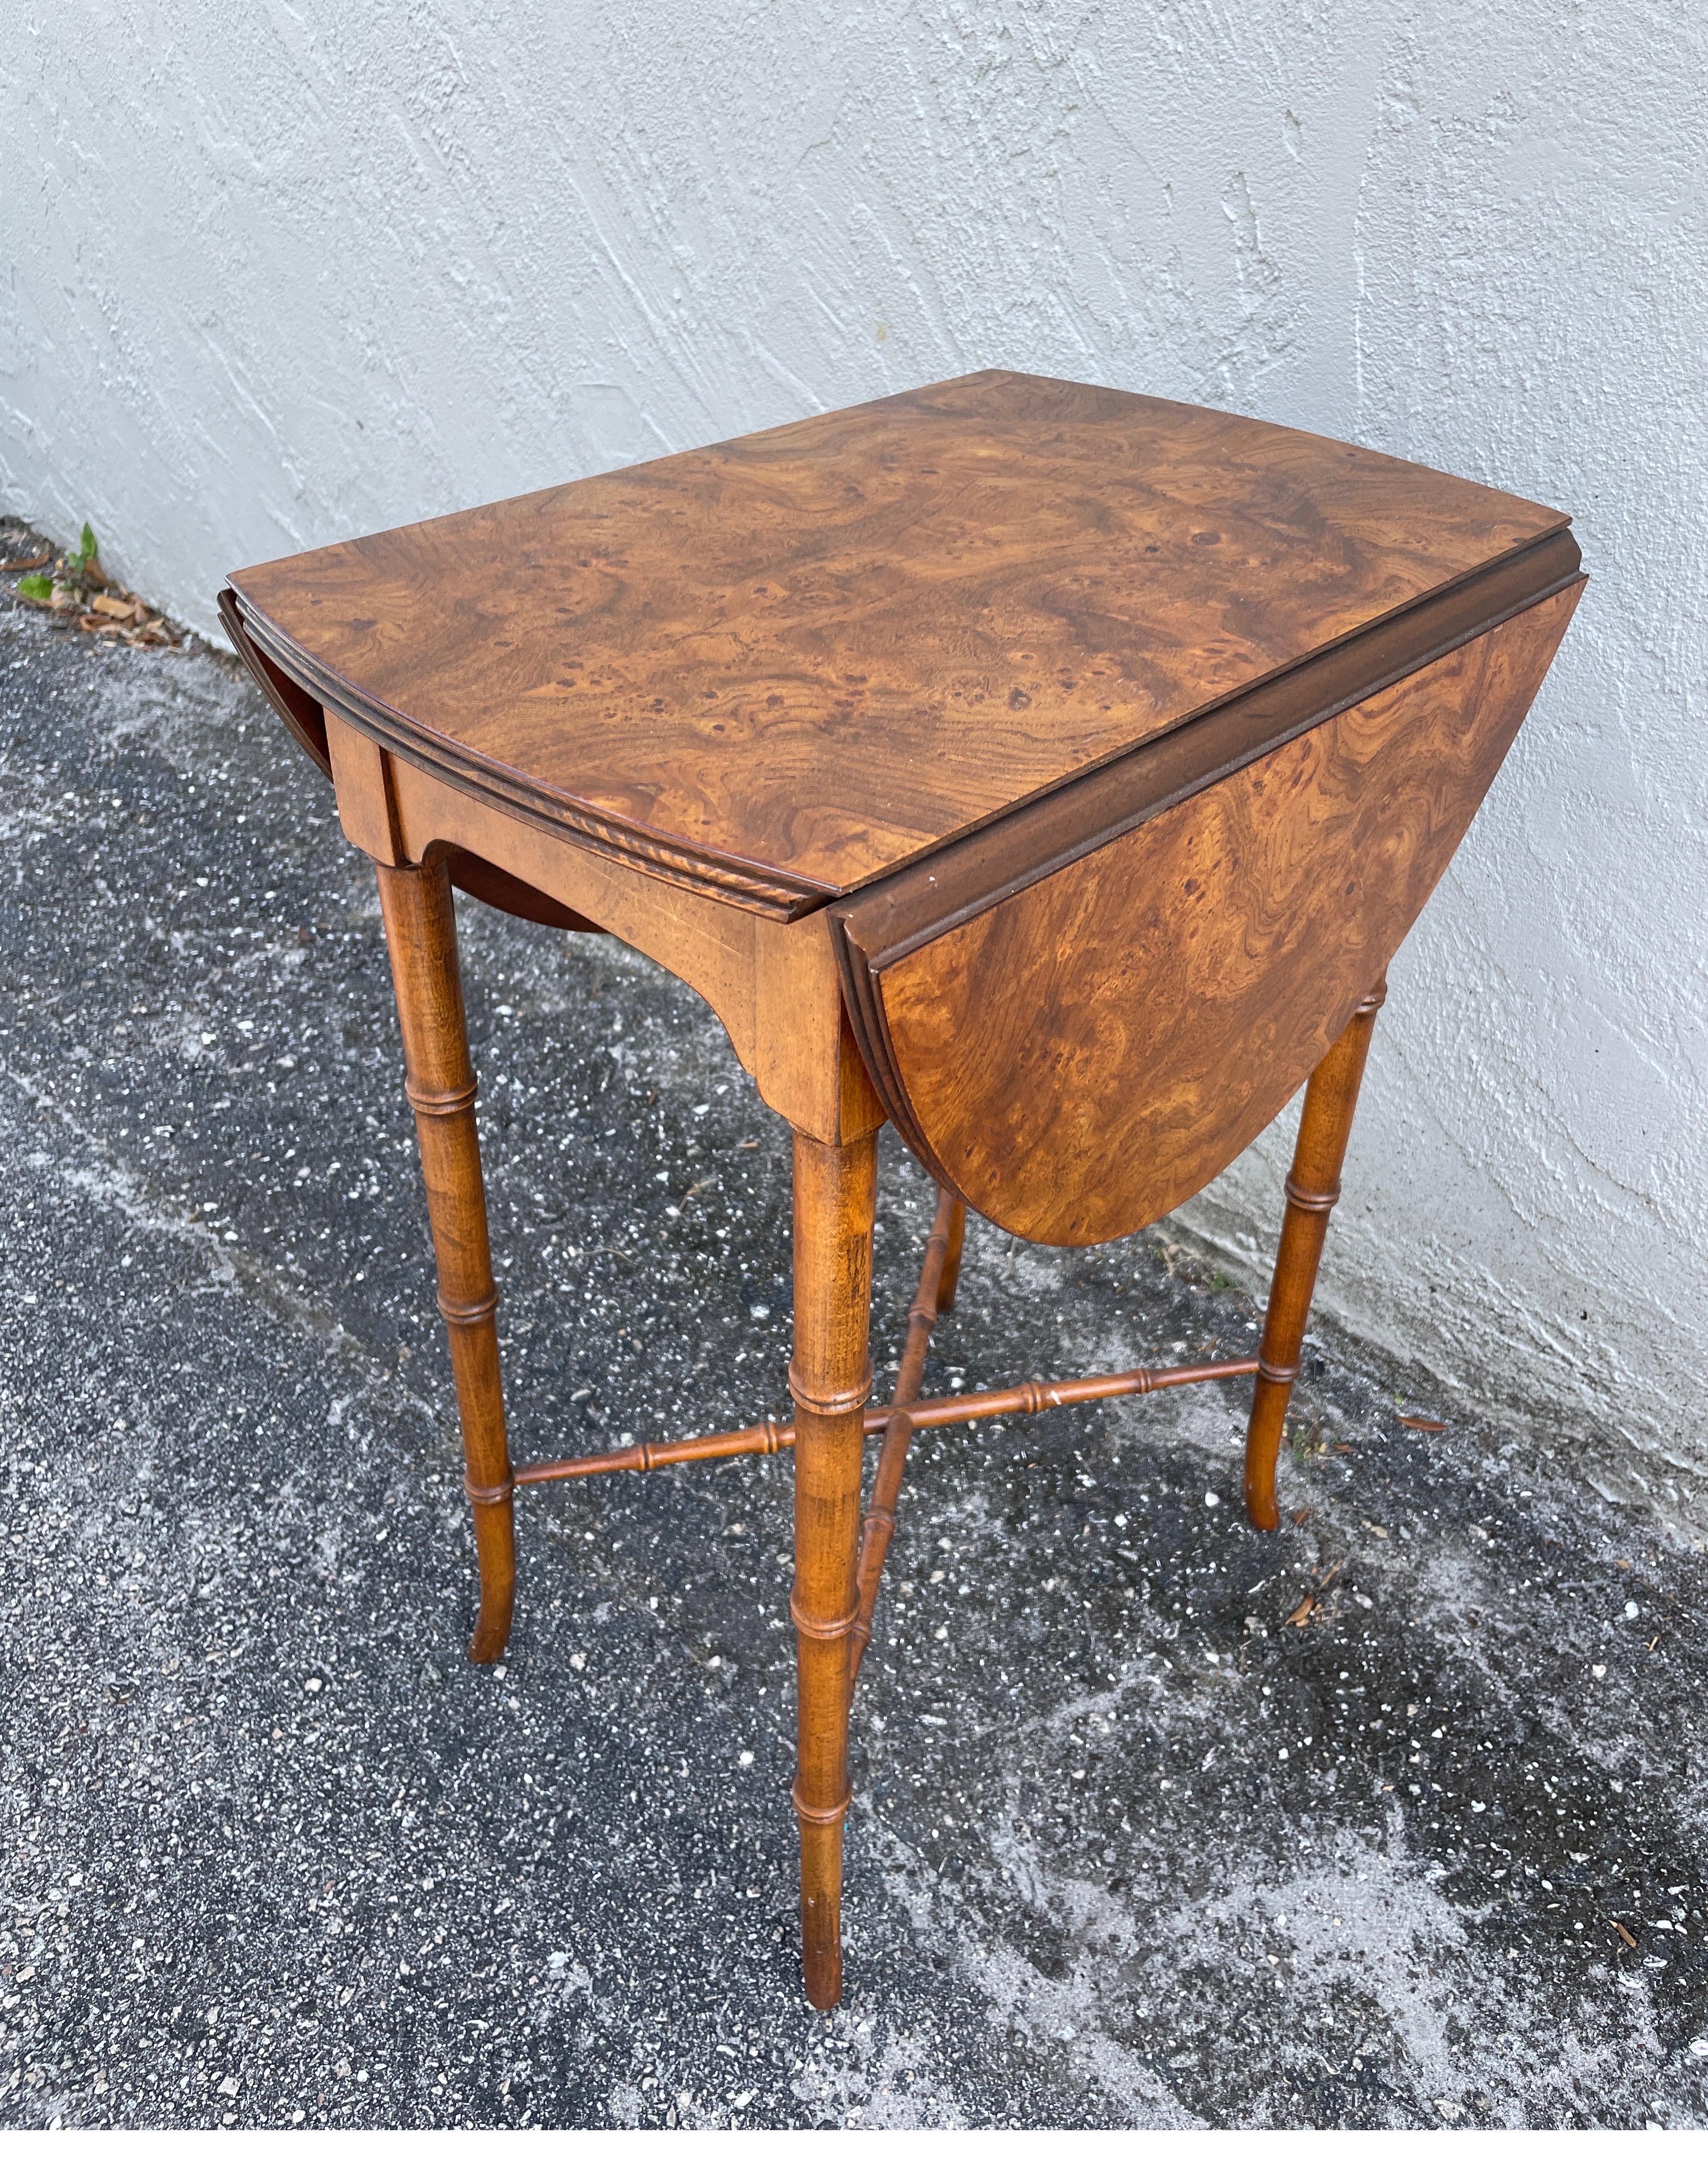 Vintage burl drop leaf side table by Baker. Fully opens to an oval shape that measures 17